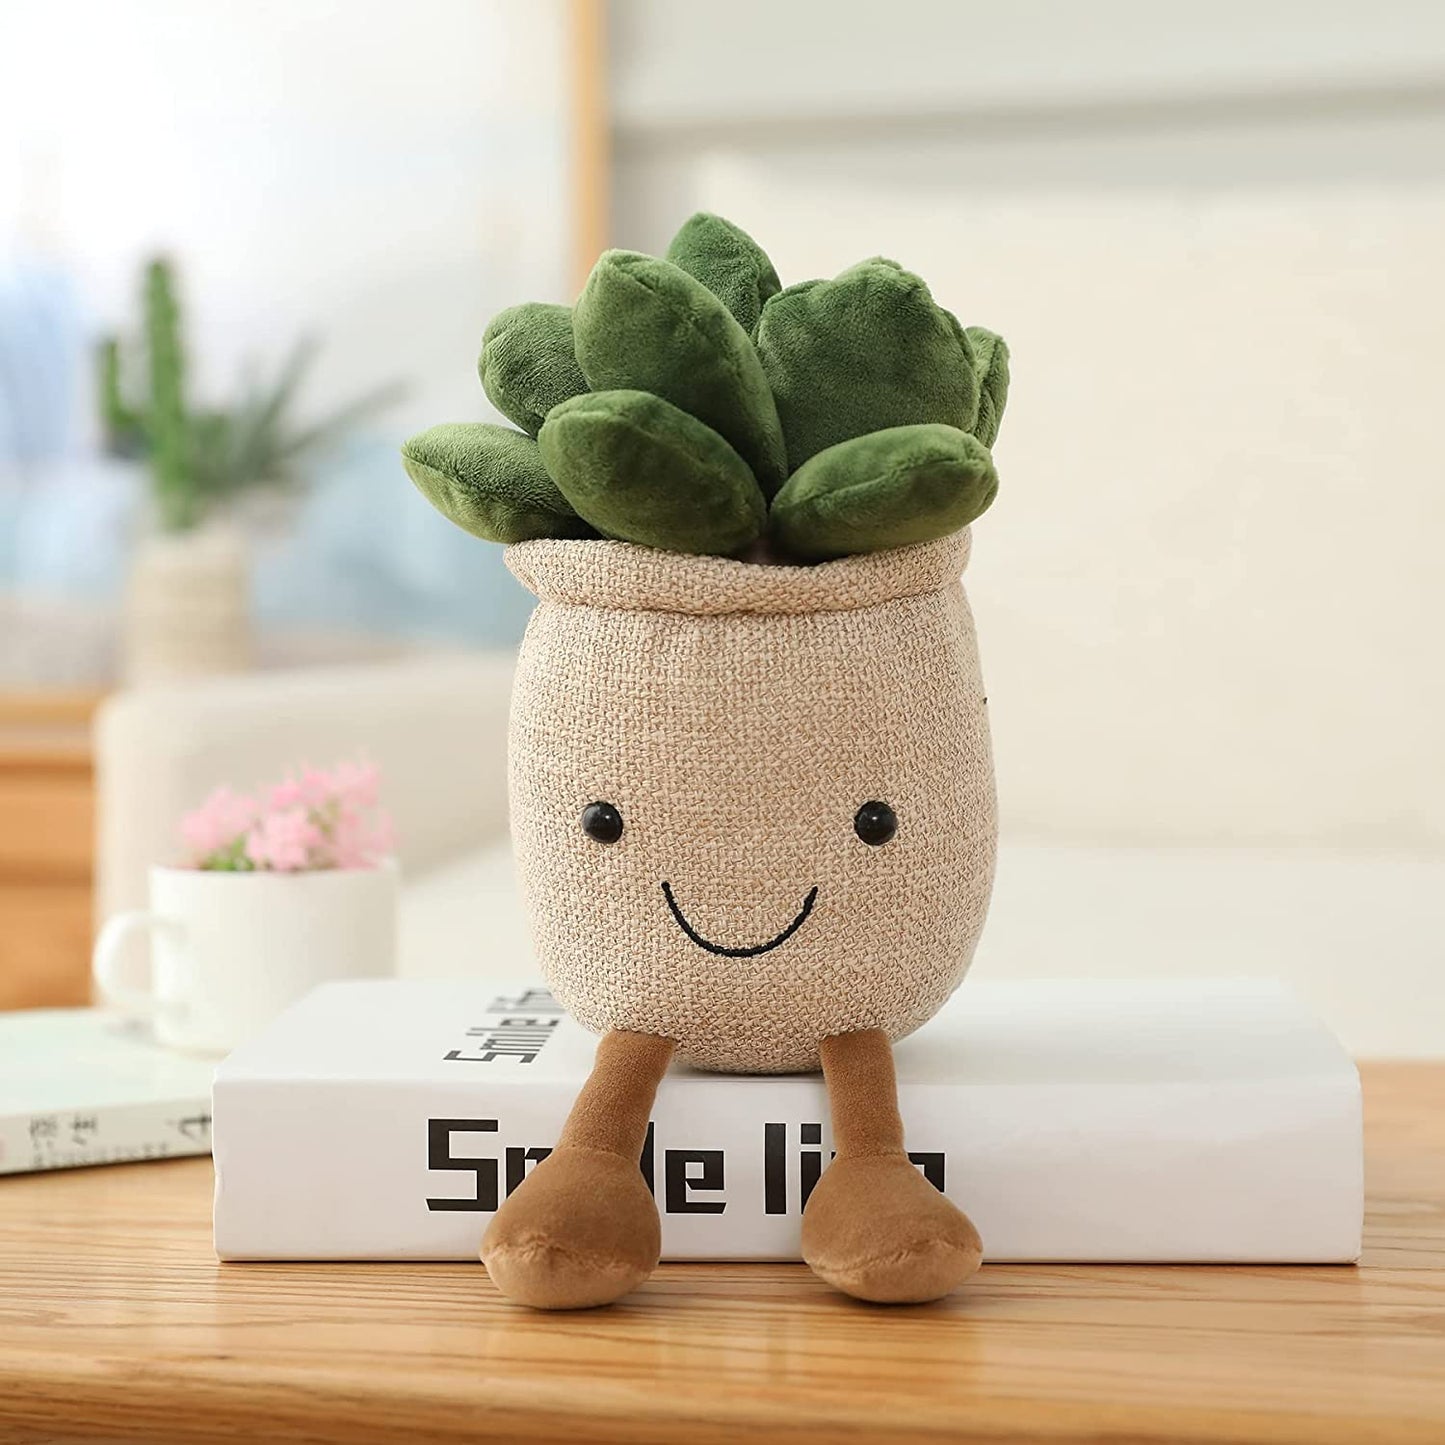 Cute Succulents Plush Toy, 9.8'' Potted Plant Stuffed Plush Pillow Decoration, Soft Fluffy Succulents Throw Pillow, Plush Toy Gift for Kids Girls (25cm/9.8inch, Khaki)